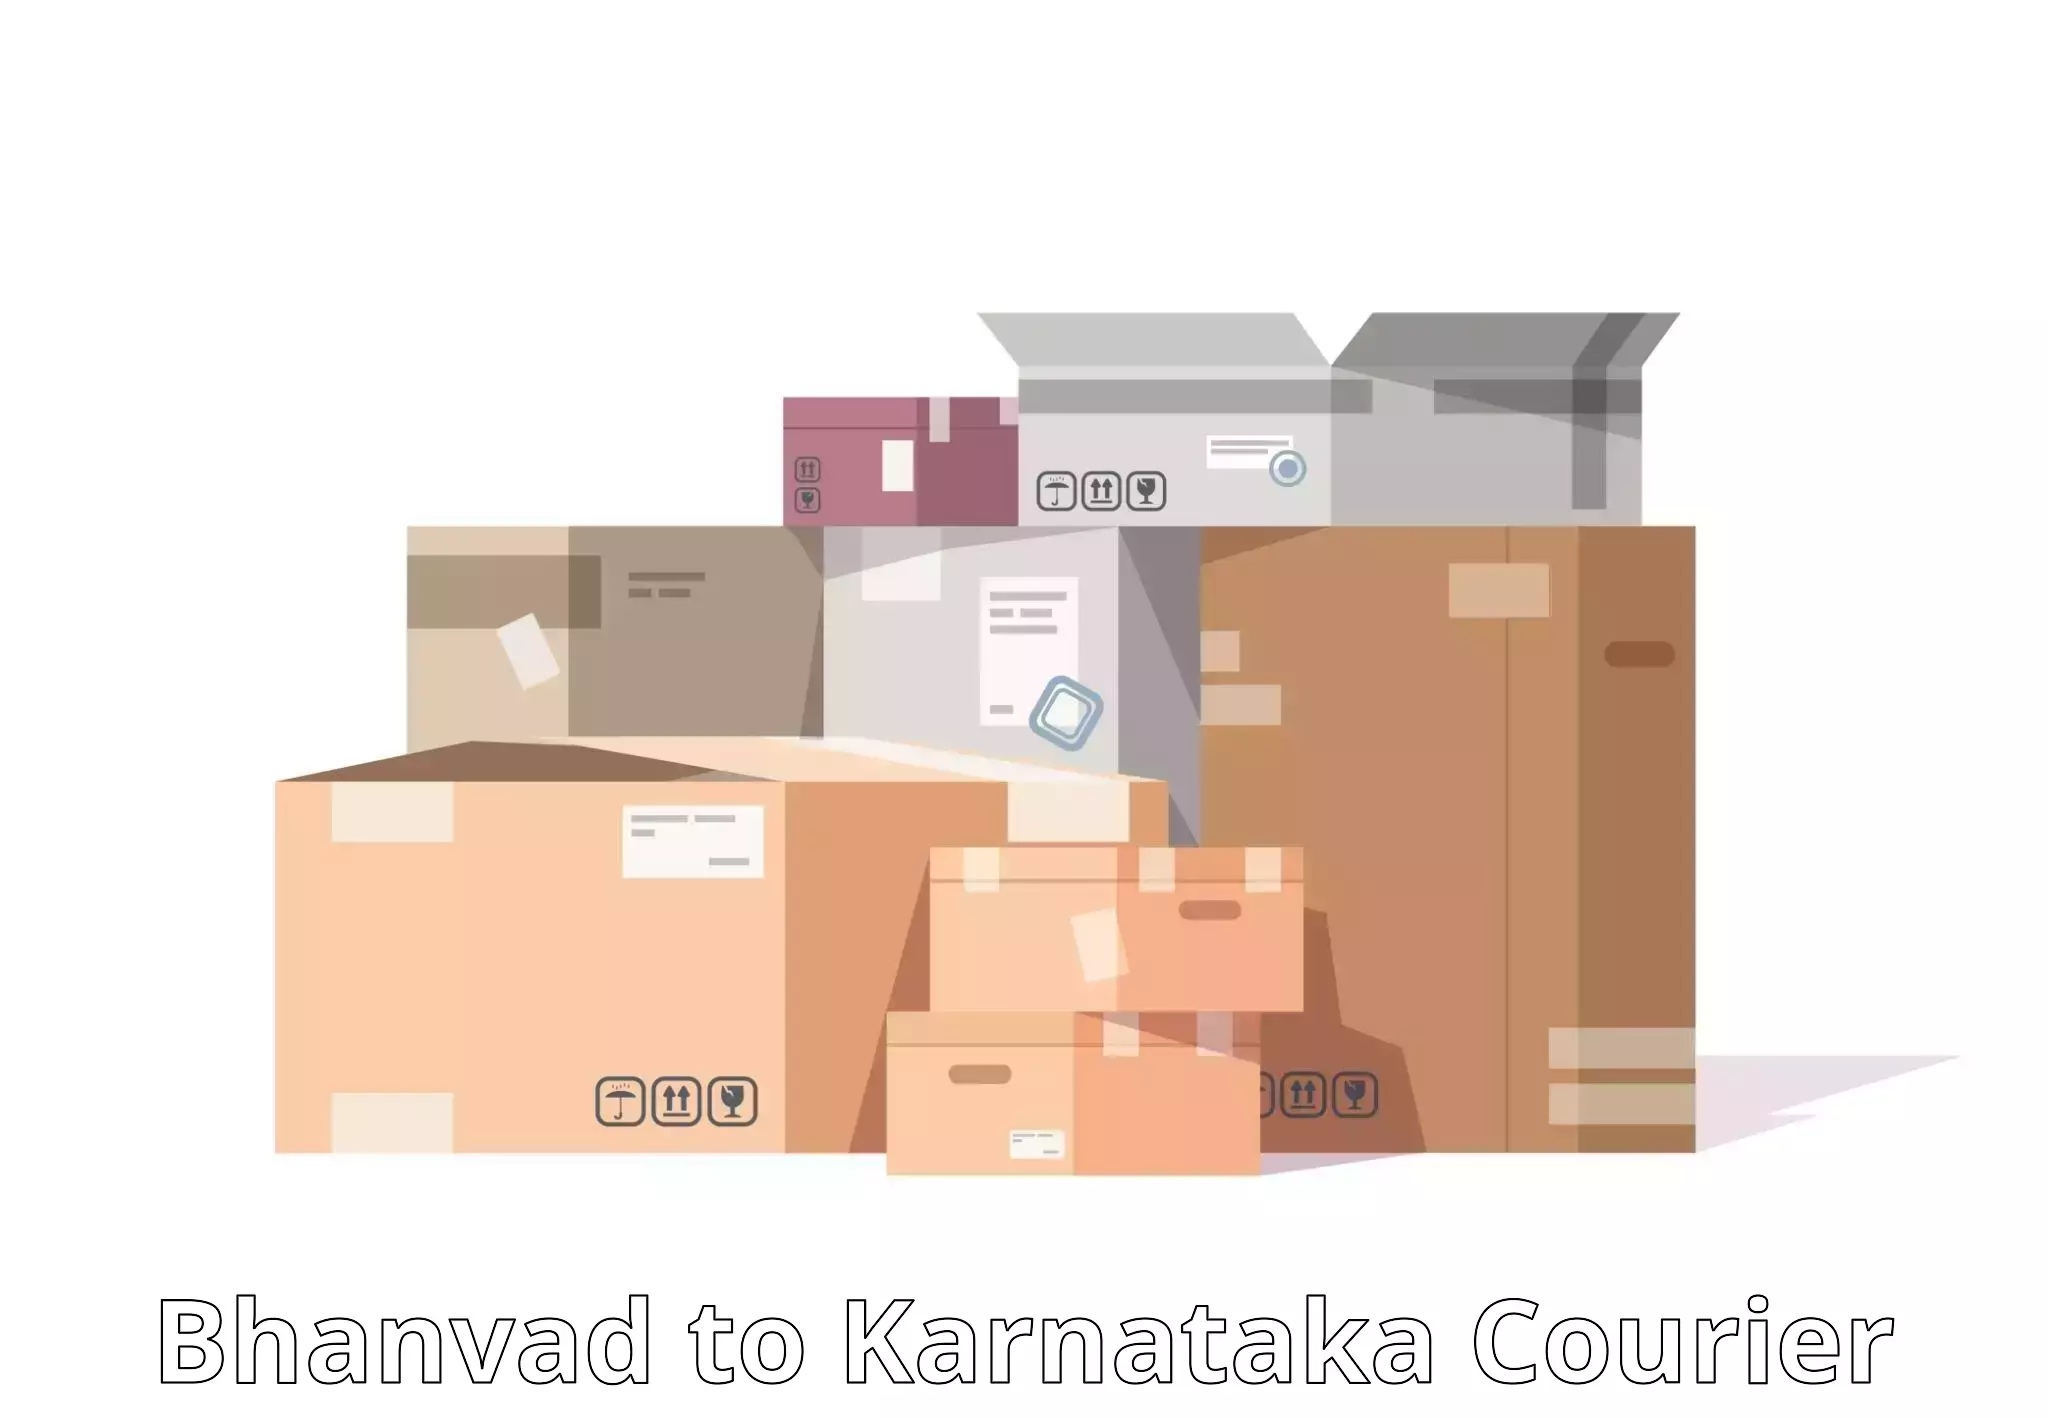 Courier service innovation in Bhanvad to Mangalore Port